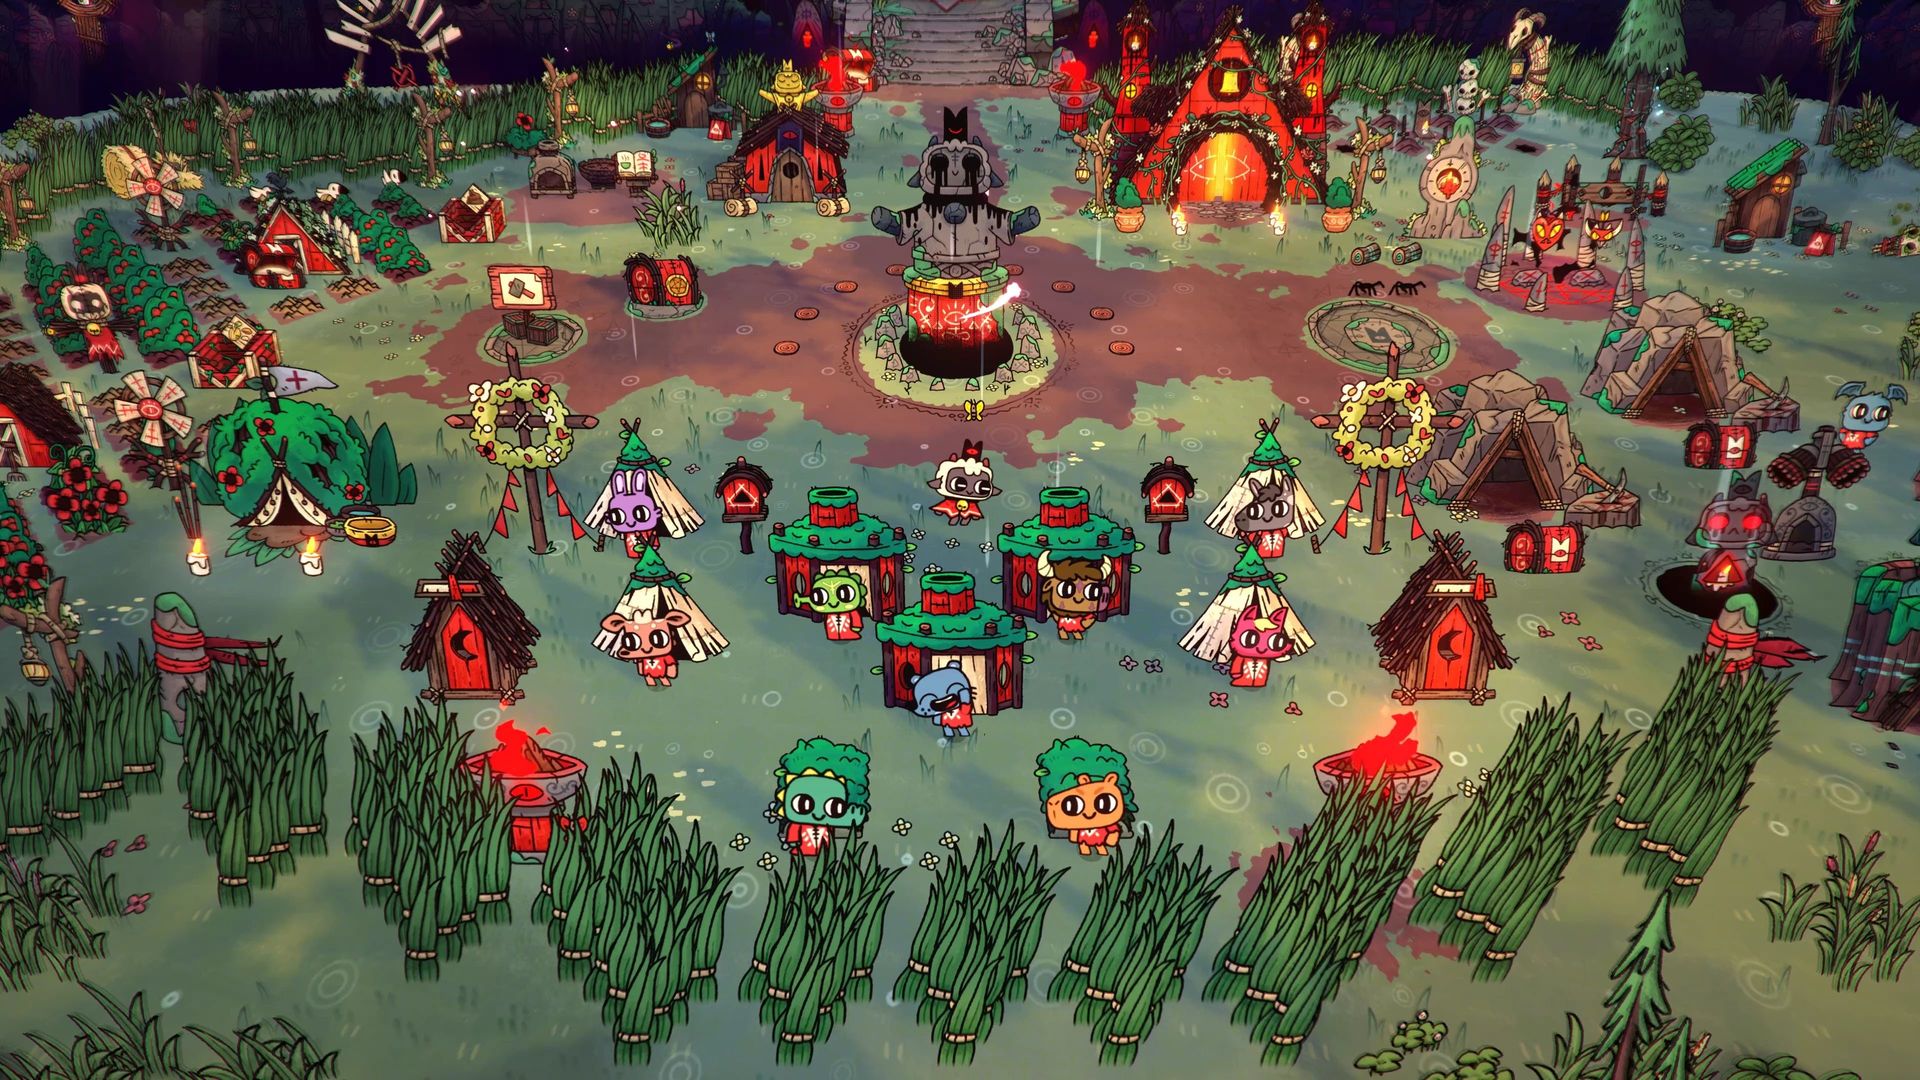 video game screenshot of animal characters walking around a rural cult compound, with a temple behind them